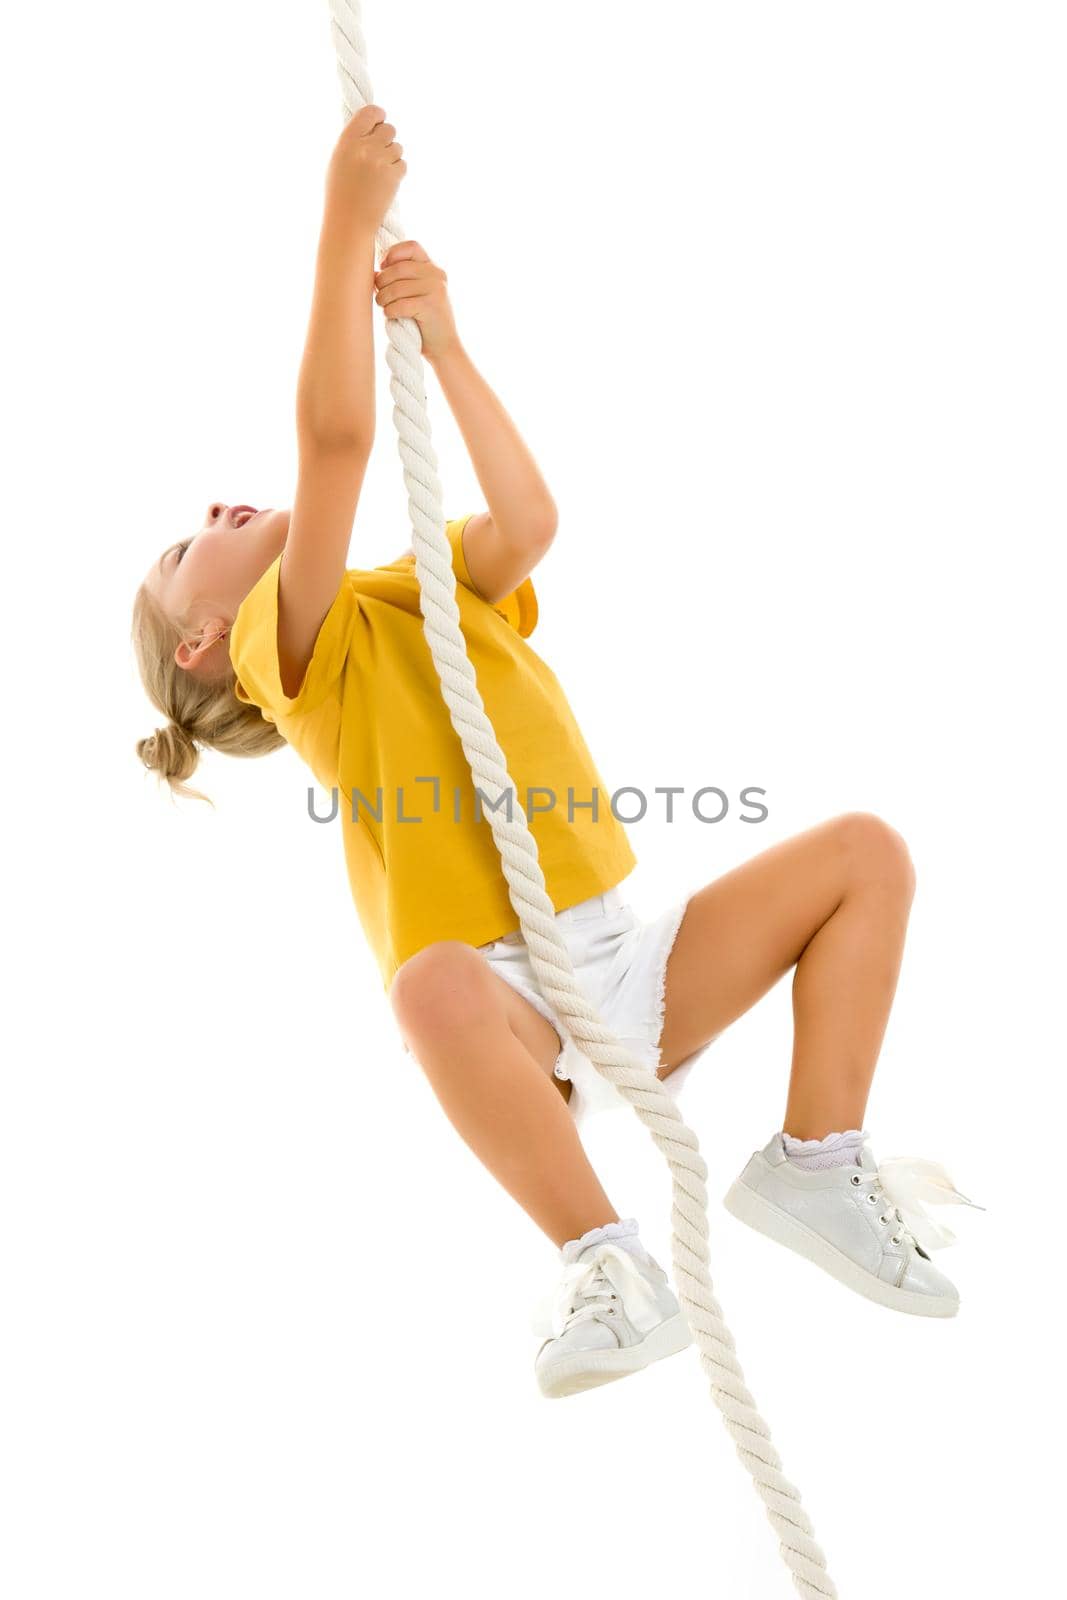 Cheerful little girl holding a rope with her hands. She tries to swing from side to side on it. Sport, fitness concept. Isolated over white background.